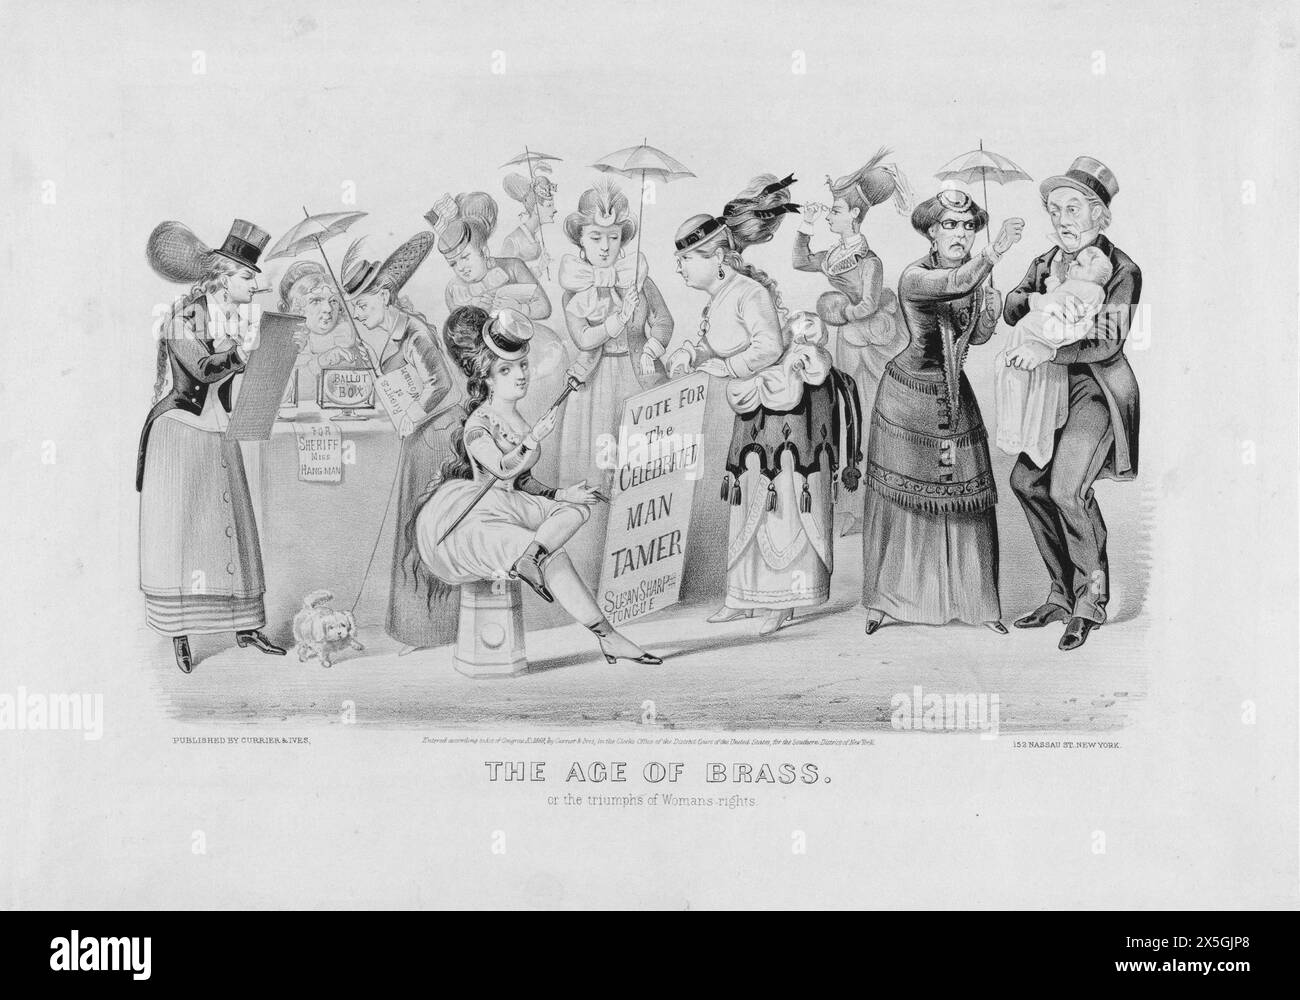 'The Age of Brass' 1869 American poster on the subject of women's right to vote (1869 was the year in which women were granted the right to vote in Wyoming). Stock Photo